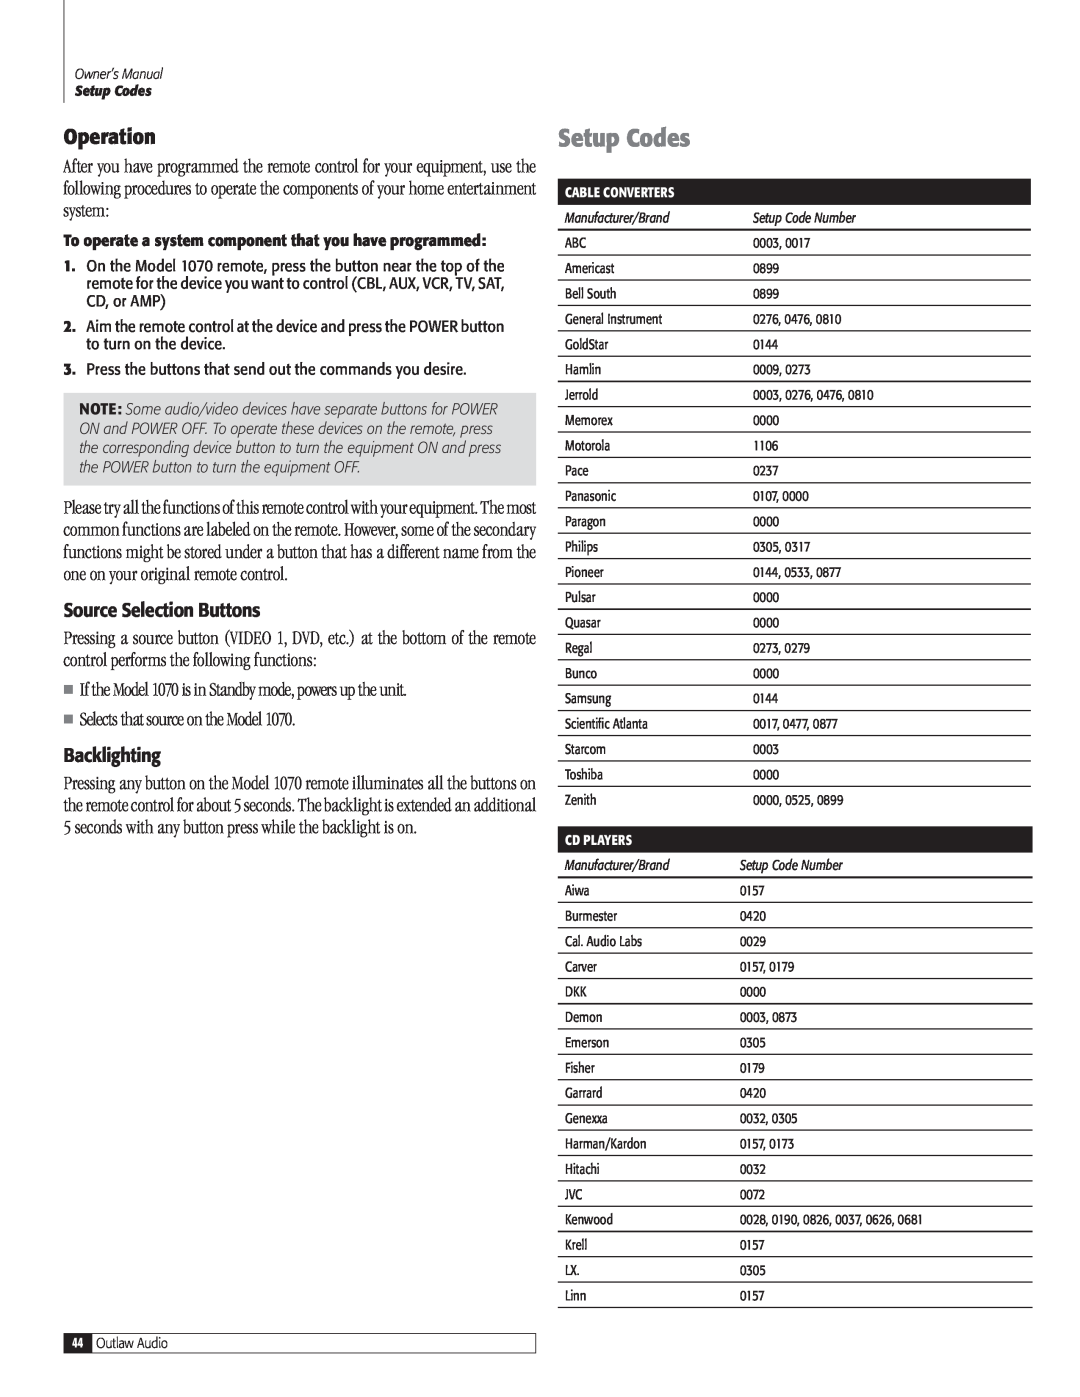 Outlaw Audio 1070 owner manual Setup Codes, Operation 